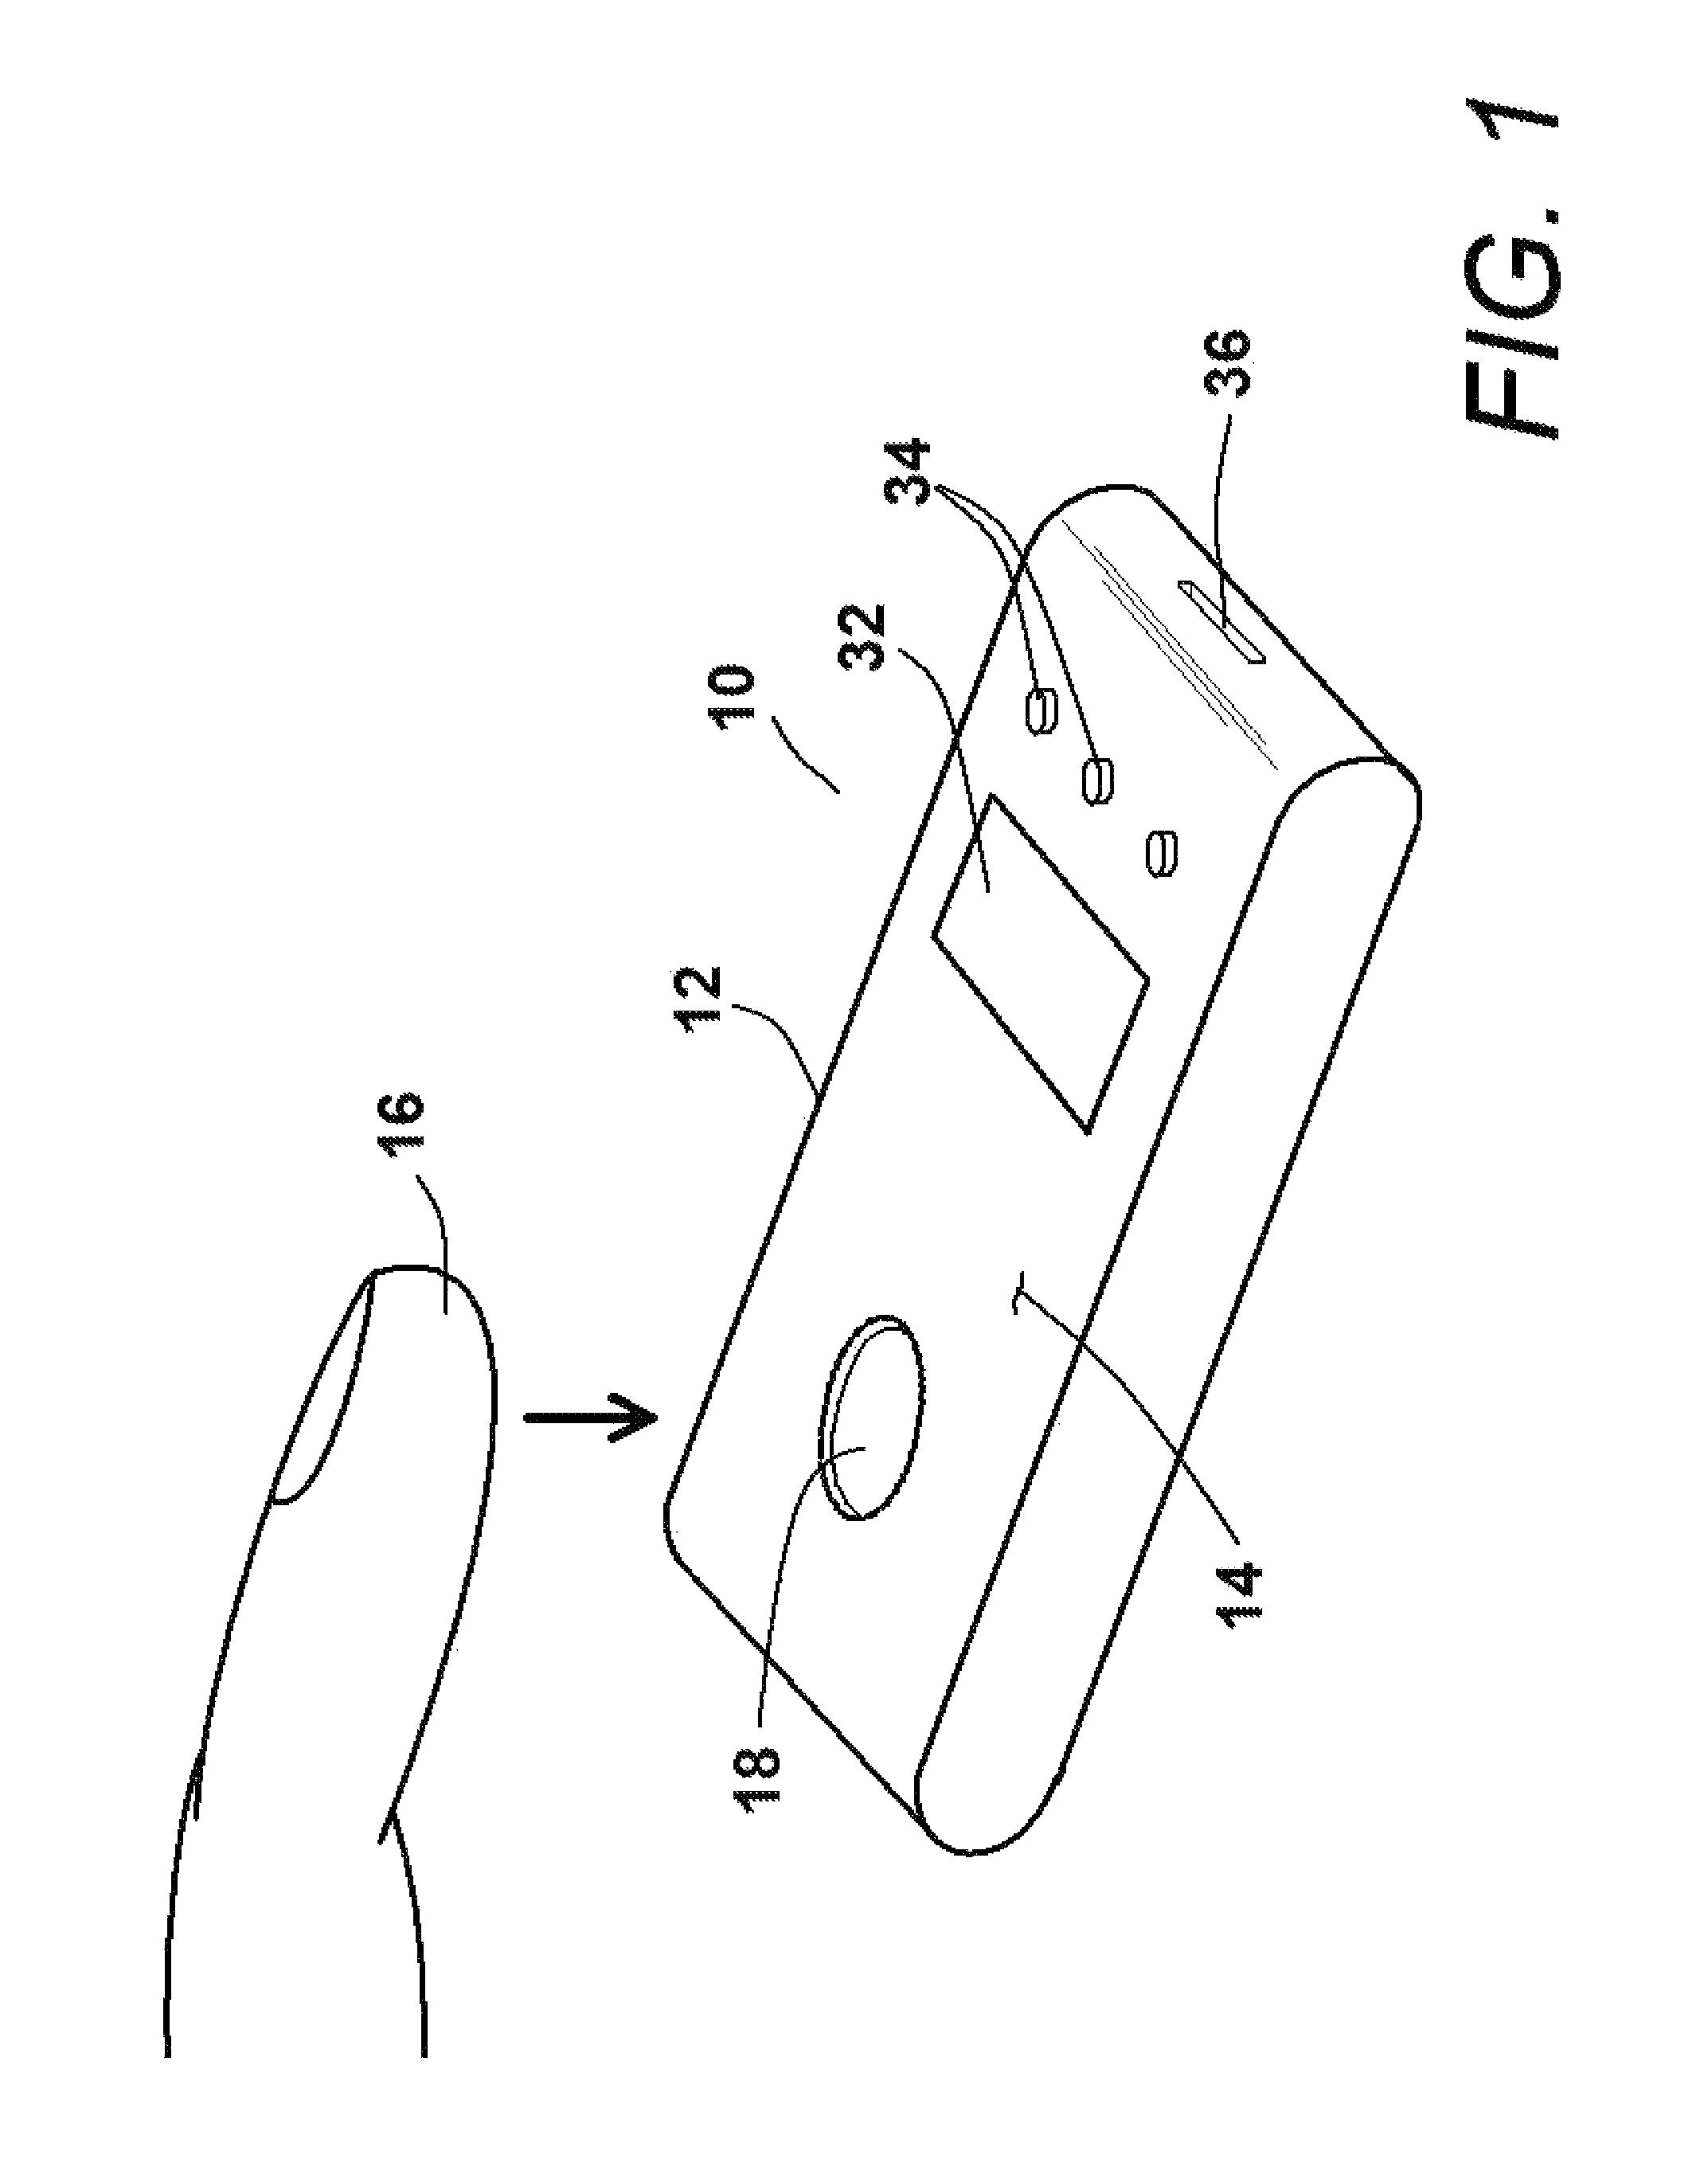 System and method for measuring blood glucose in the human body without a drawn blood sample